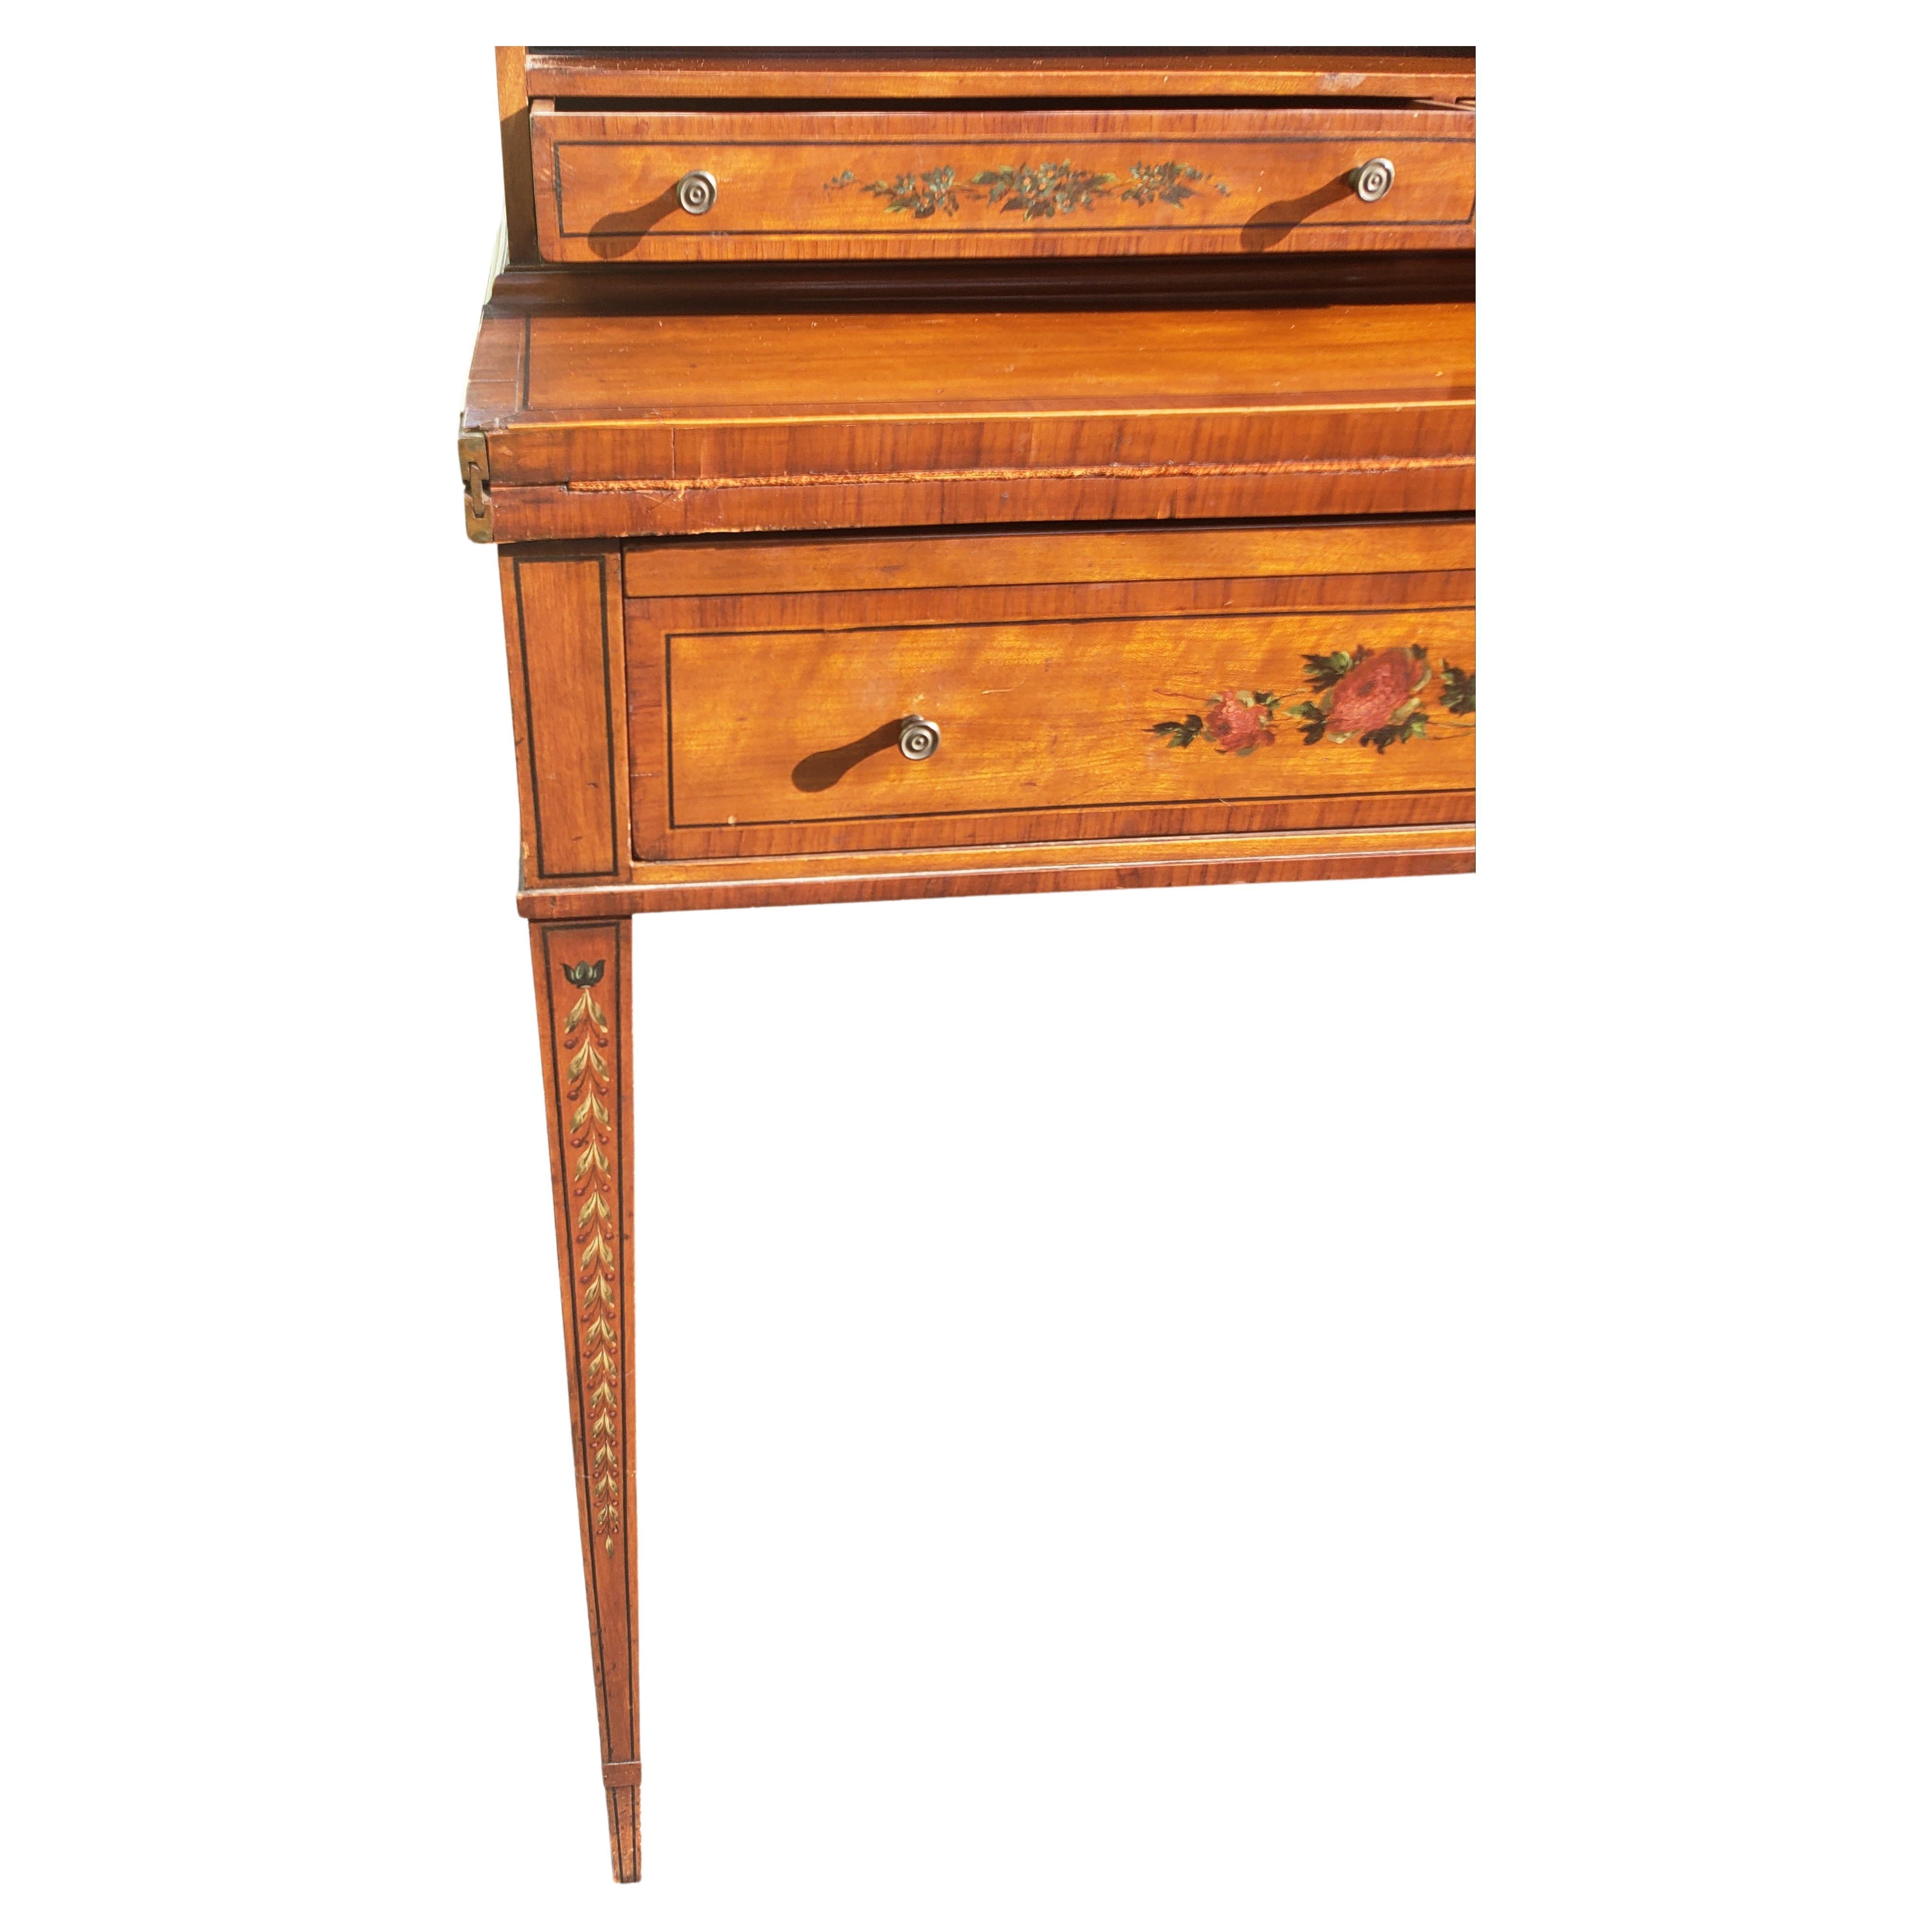 1940s Petite Mahogany Ornate Painted Secretary Bureau with Flip Leather Top In Good Condition For Sale In Germantown, MD